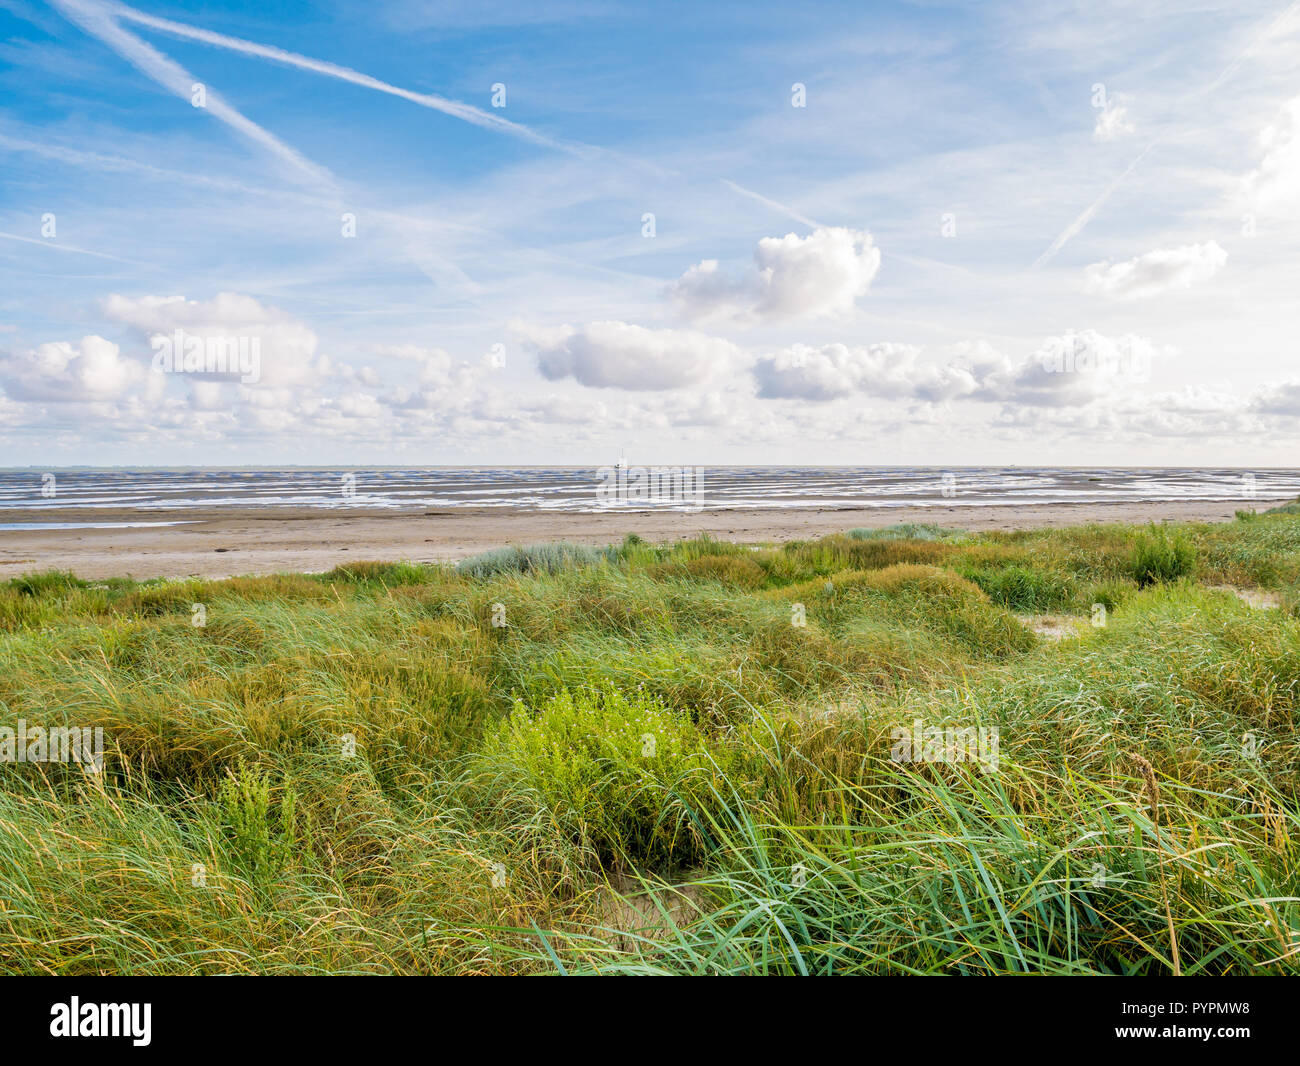 Coastline with dunes, beach and boat dried out on tidal flats at low tide of Wadden Sea, Boschplaat, Terschelling, Netherlands Stock Photo